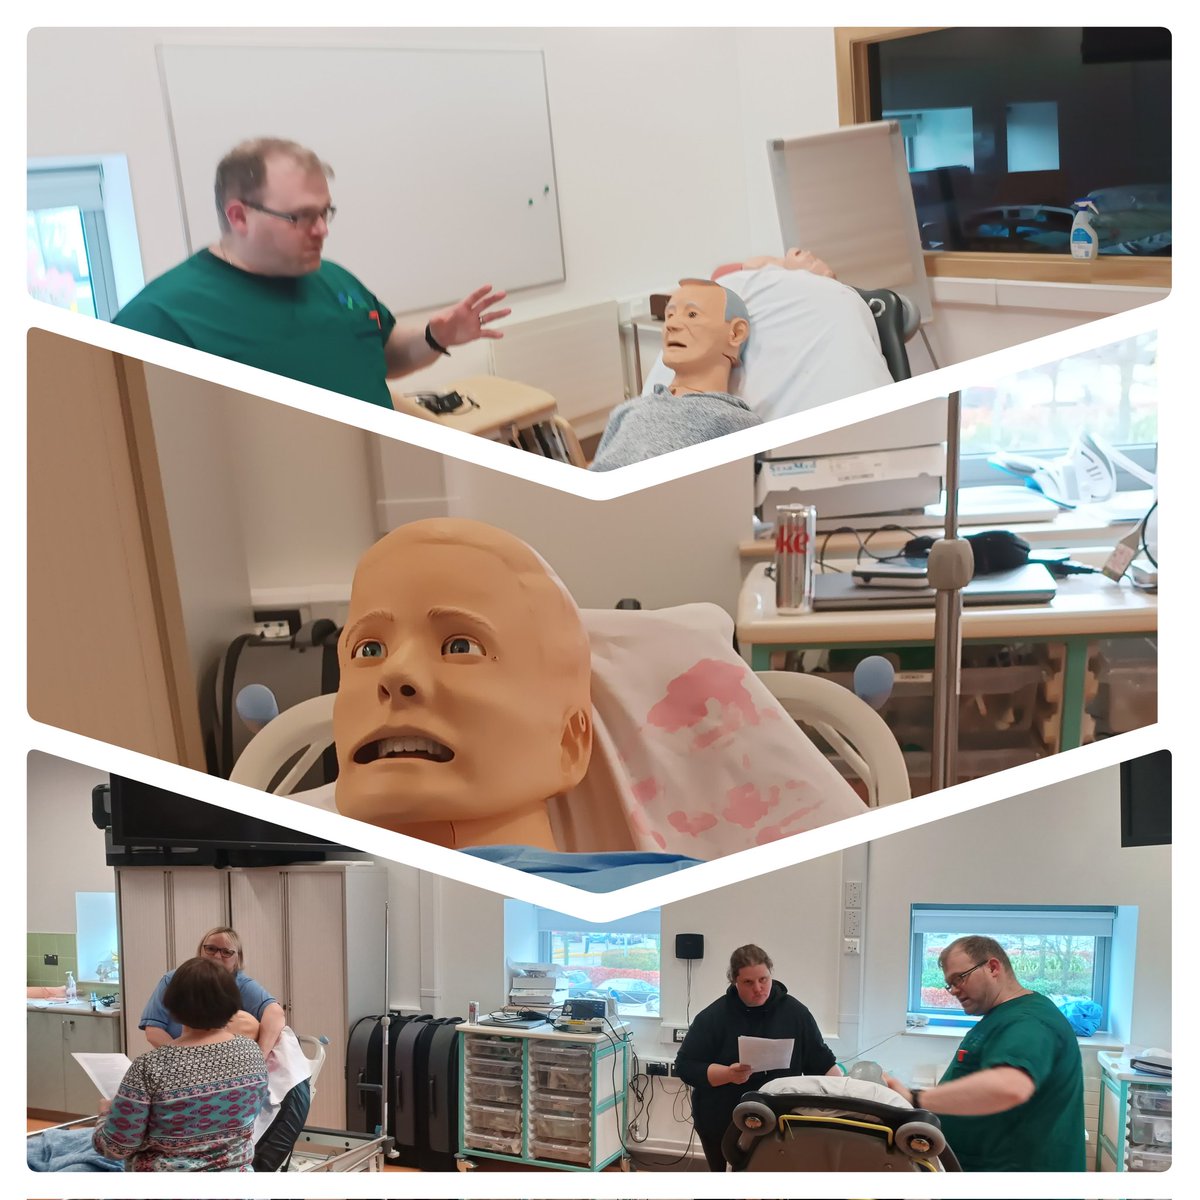 Great to practice OSCE today with the staff currently studying Advanced Comprehensive Health Assessment at TUS Athlone. Learning through simulation. @DMHospitalGroup @EdTullamore @HSELive @NMPDMidlands